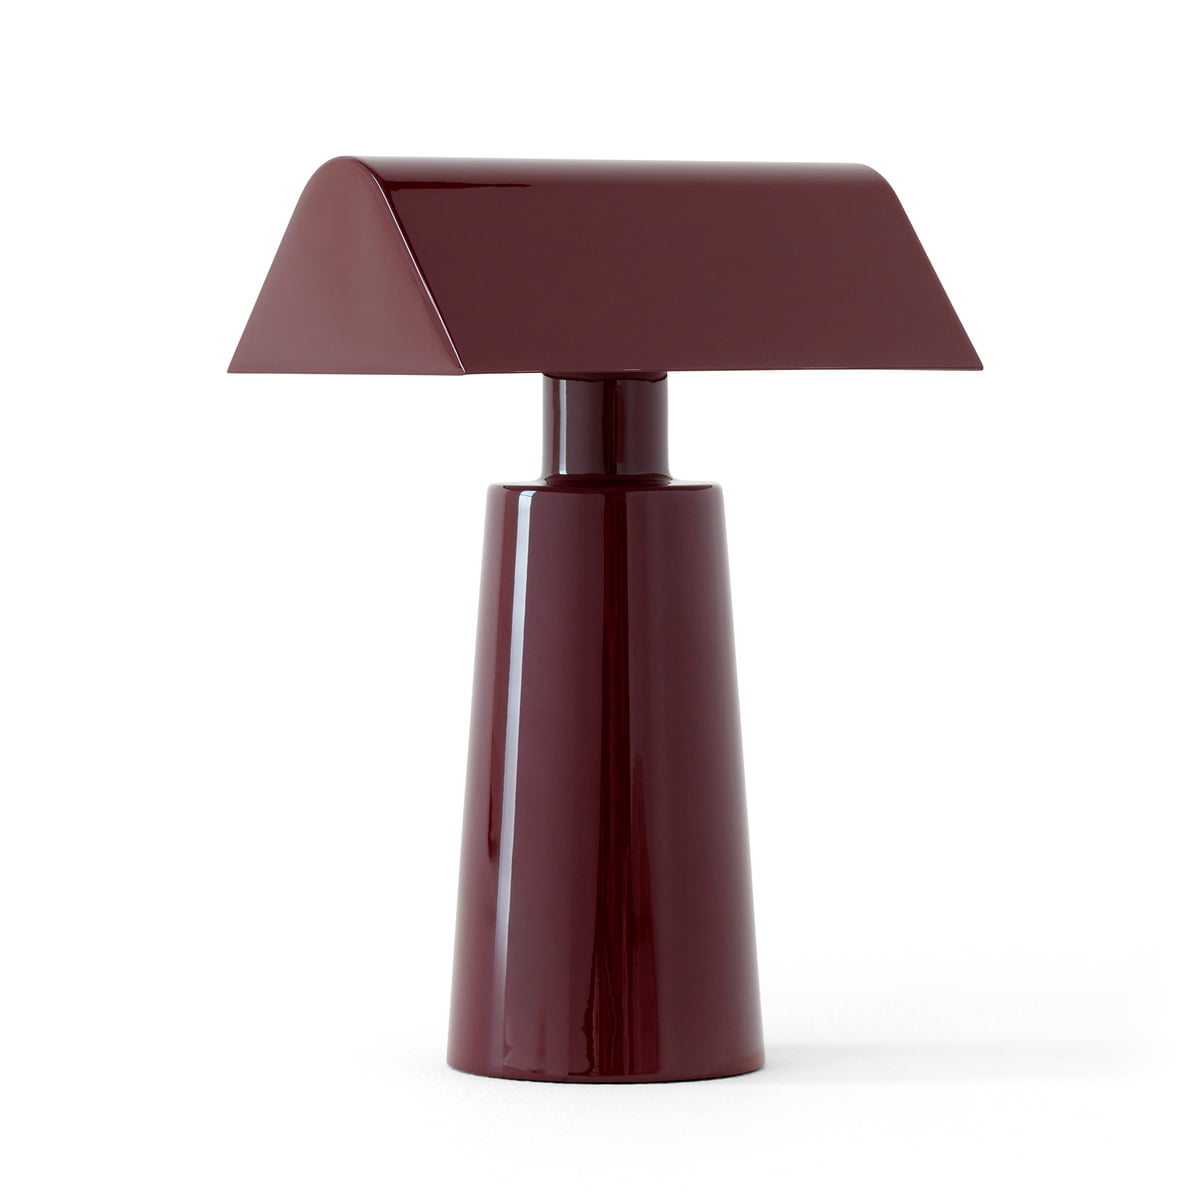 Tradition - Como SC53 Portable Table Lamp Red Brown